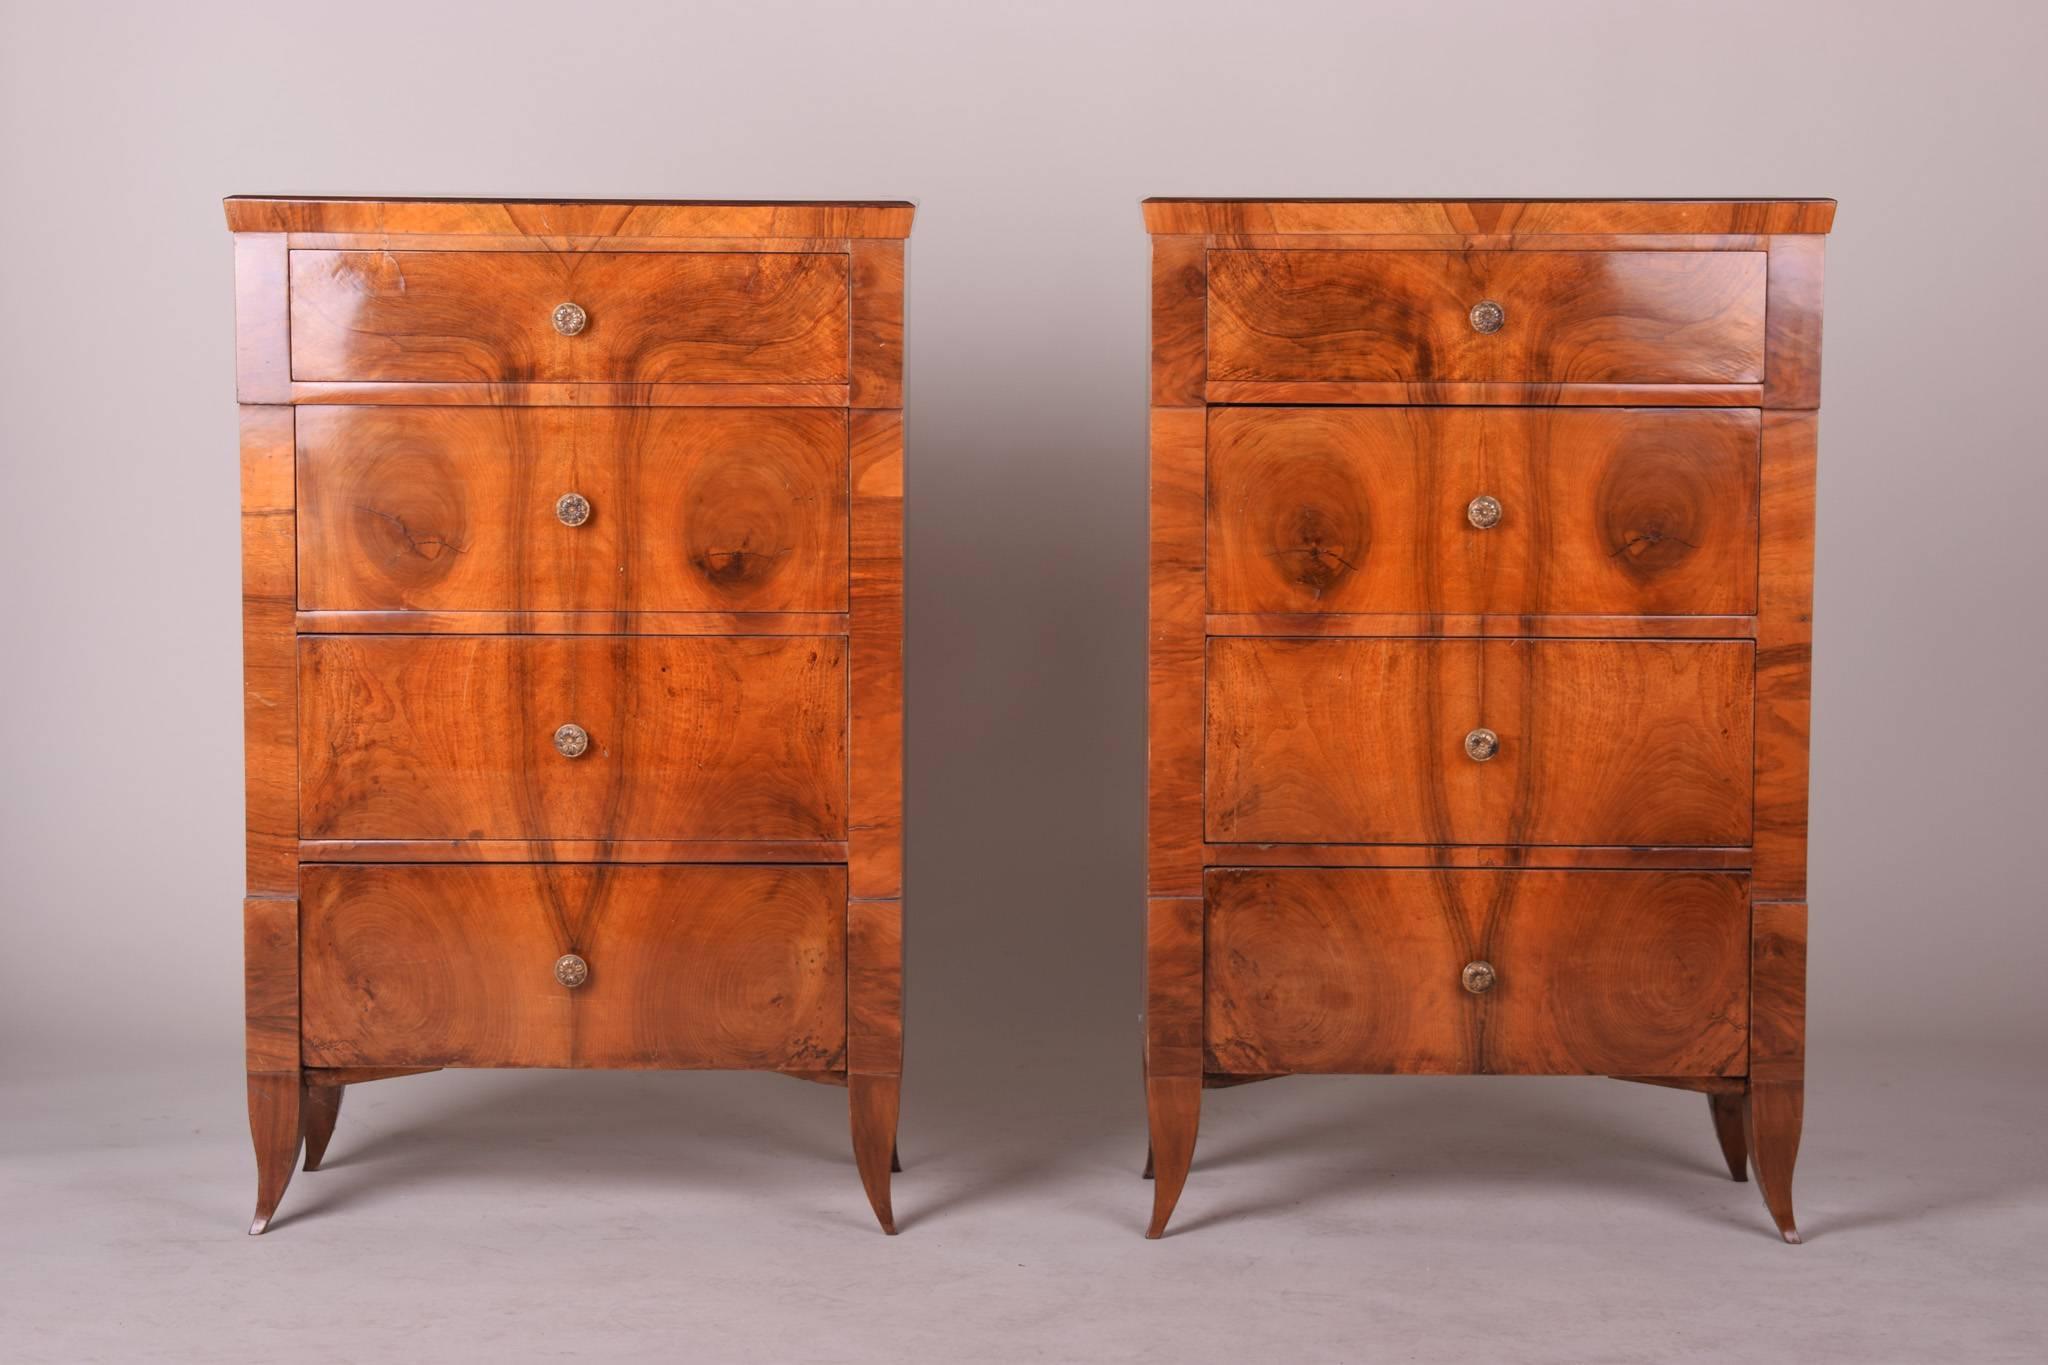 Pair of Biedermeier's commodes
Completely restored. Shellac polish used for the surface. 
Country of origin is Germany from period 1830-1839.